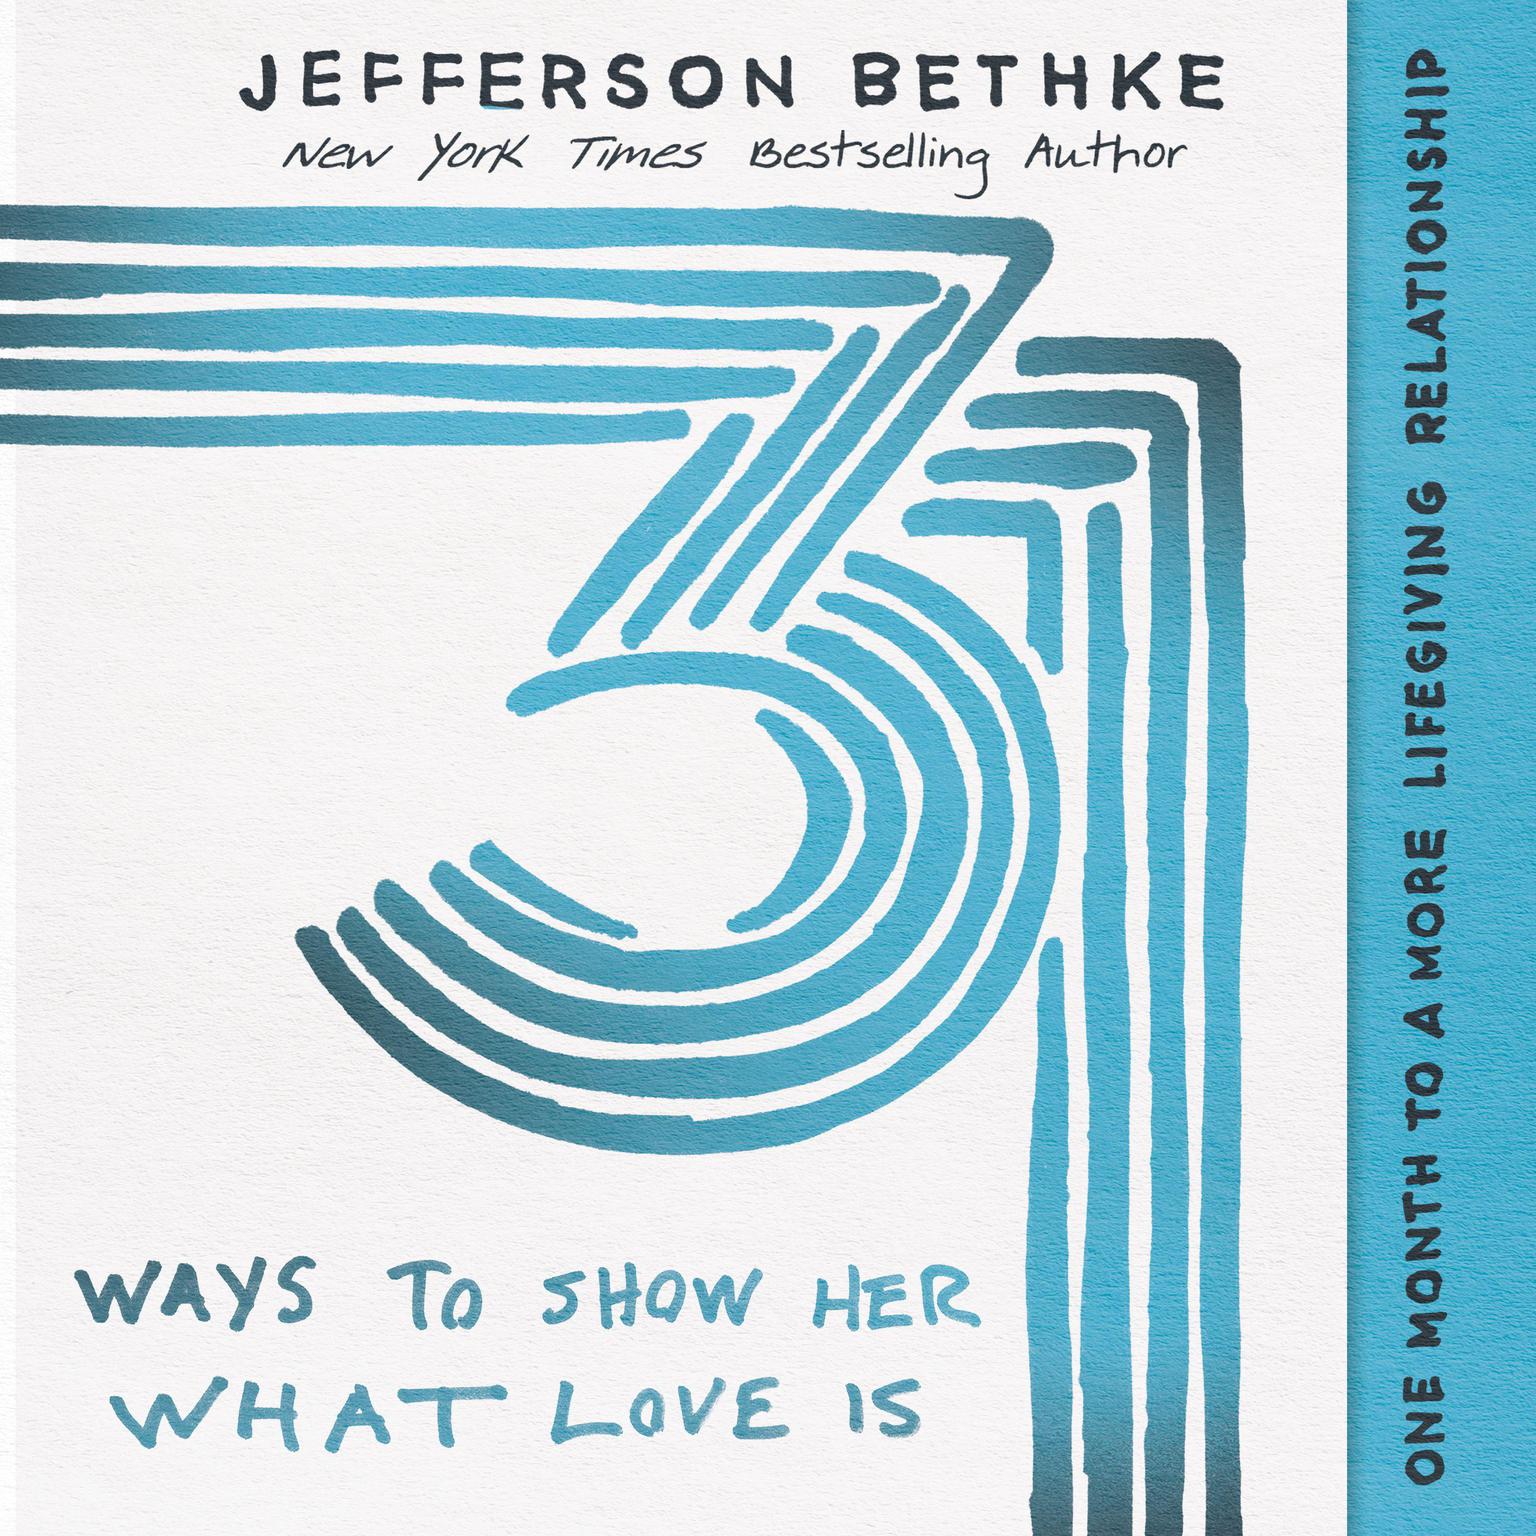 31 Ways to Show Her What Love Is: One Month to a More Lifegiving Relationship Audiobook, by Jefferson Bethke